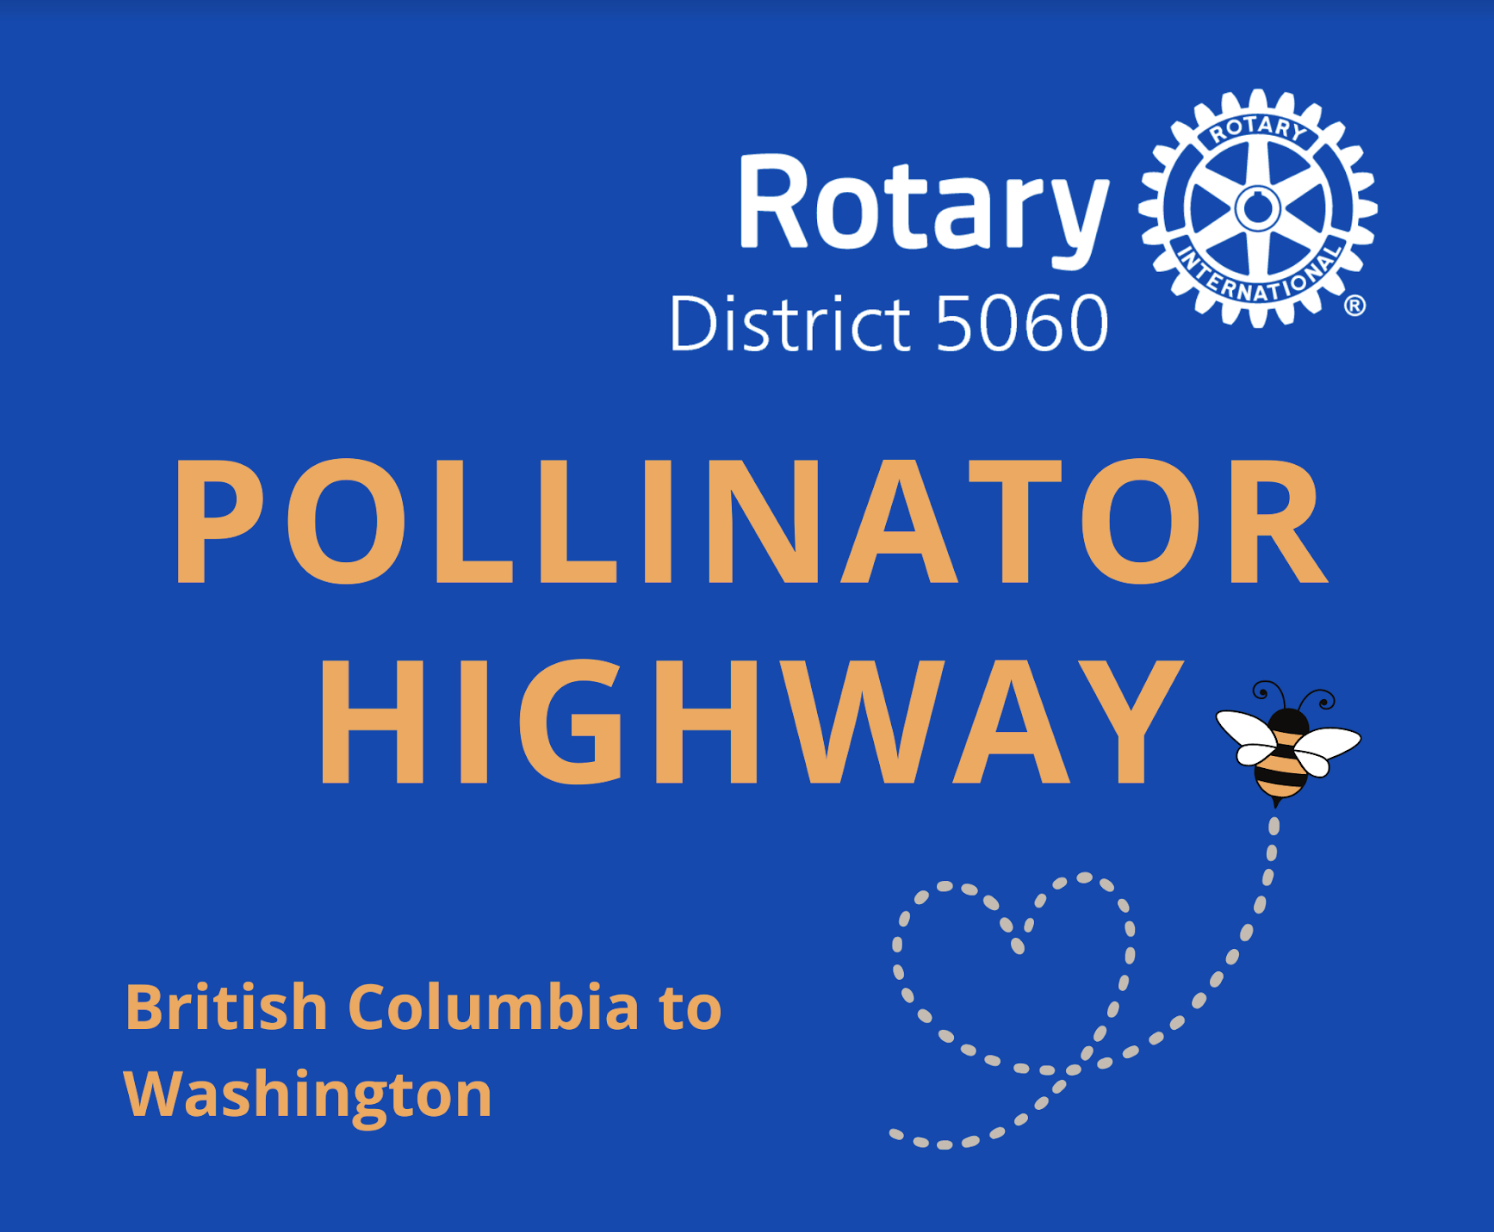 Rotary Clubs of District 5060 Pollinator Highway